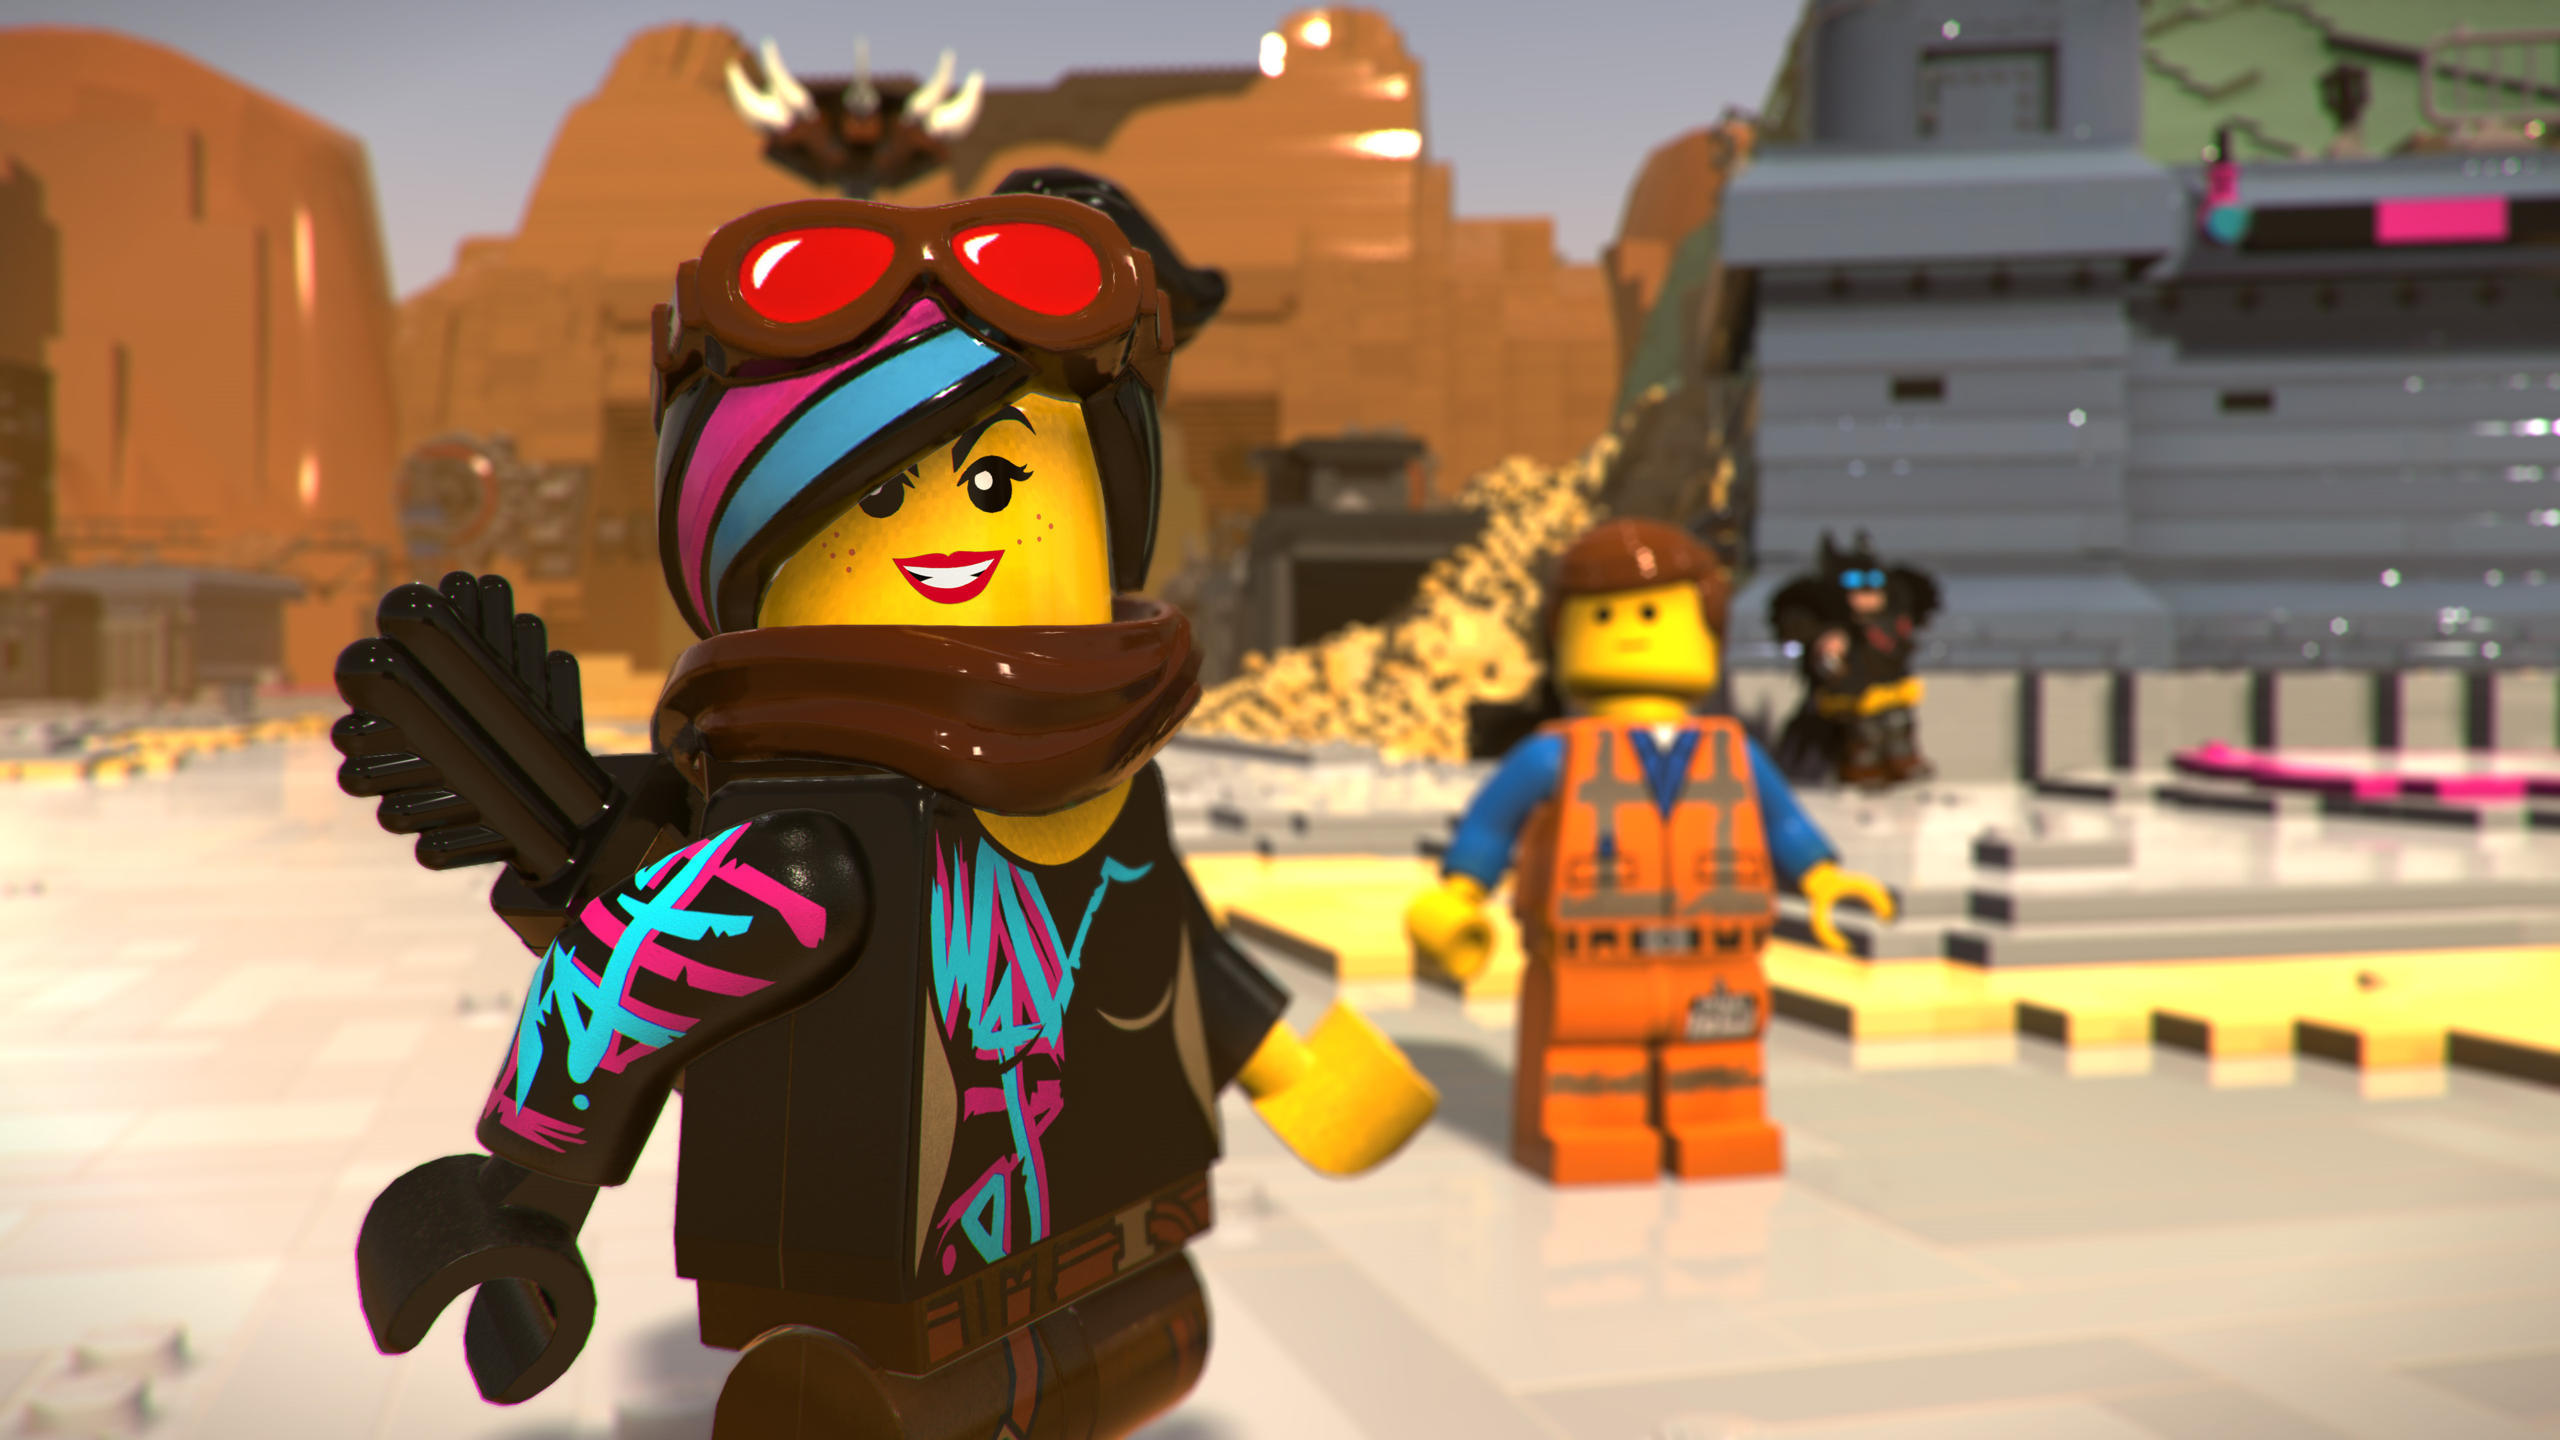 The Lego Movie 2 - Videogame